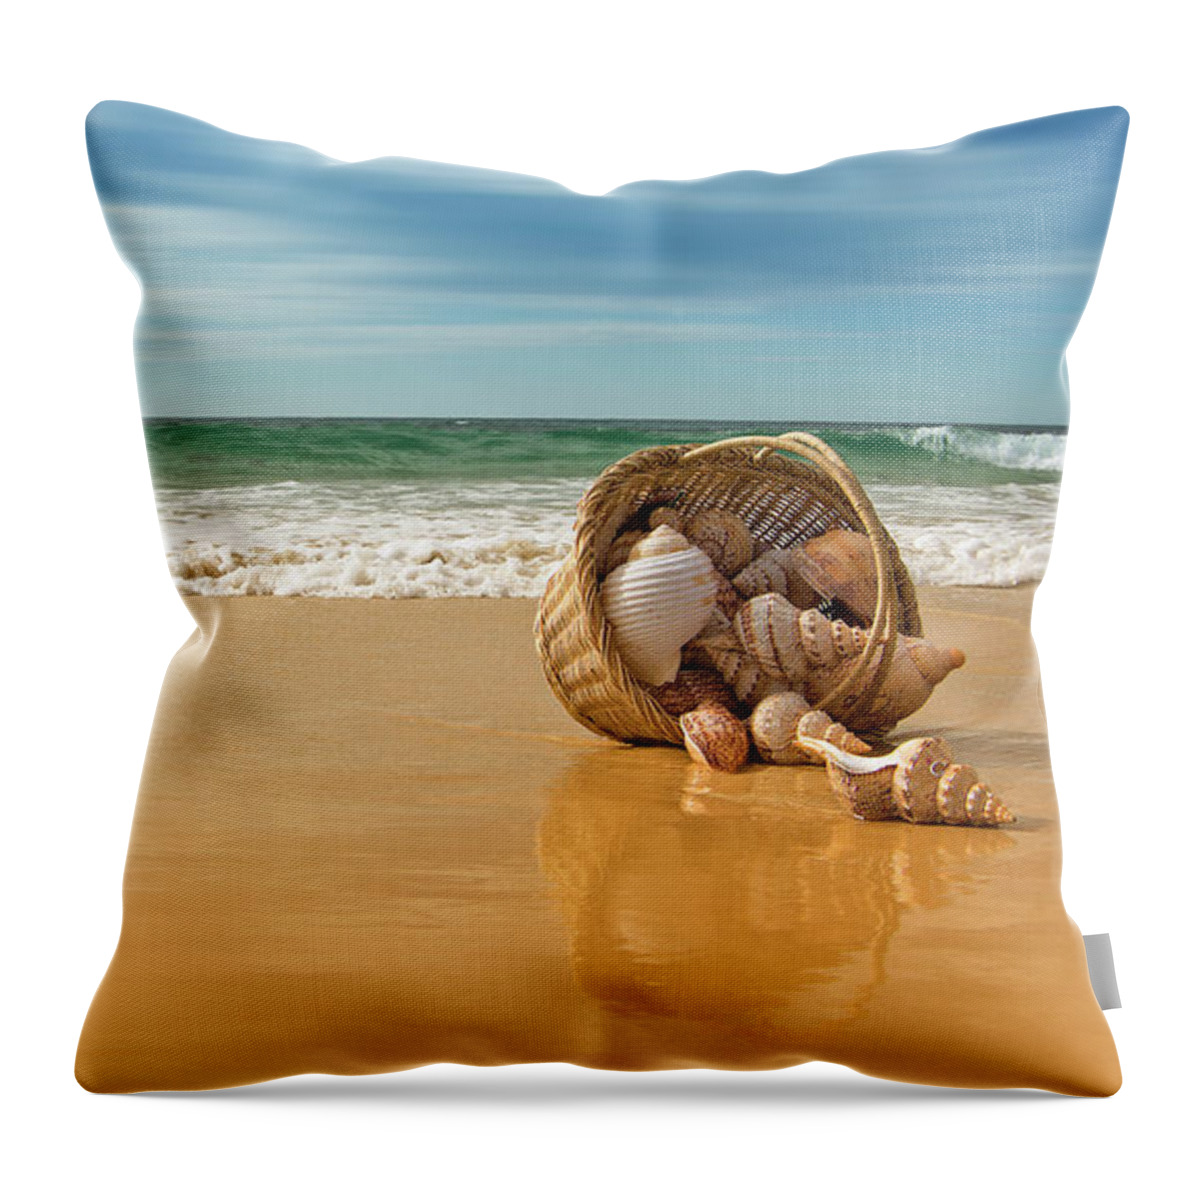 Seashells Forster Throw Pillow featuring the digital art Seashells Forster 061 by Kevin Chippindall